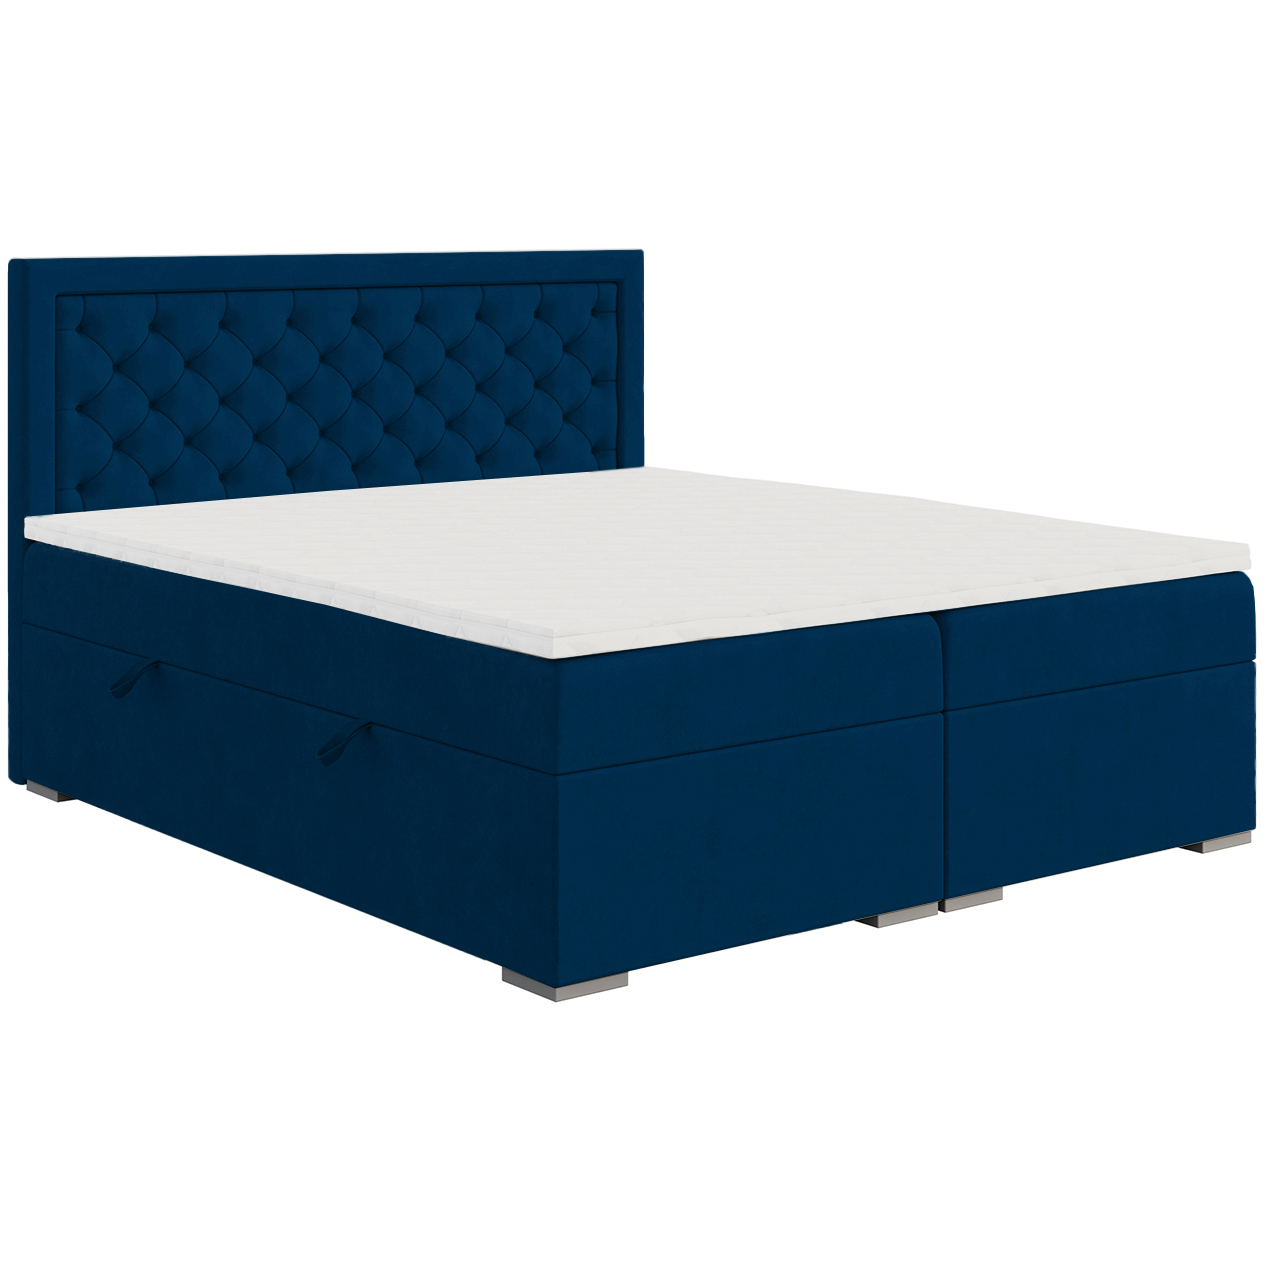 Upholstered bed BLUM 180x200 riviera 81